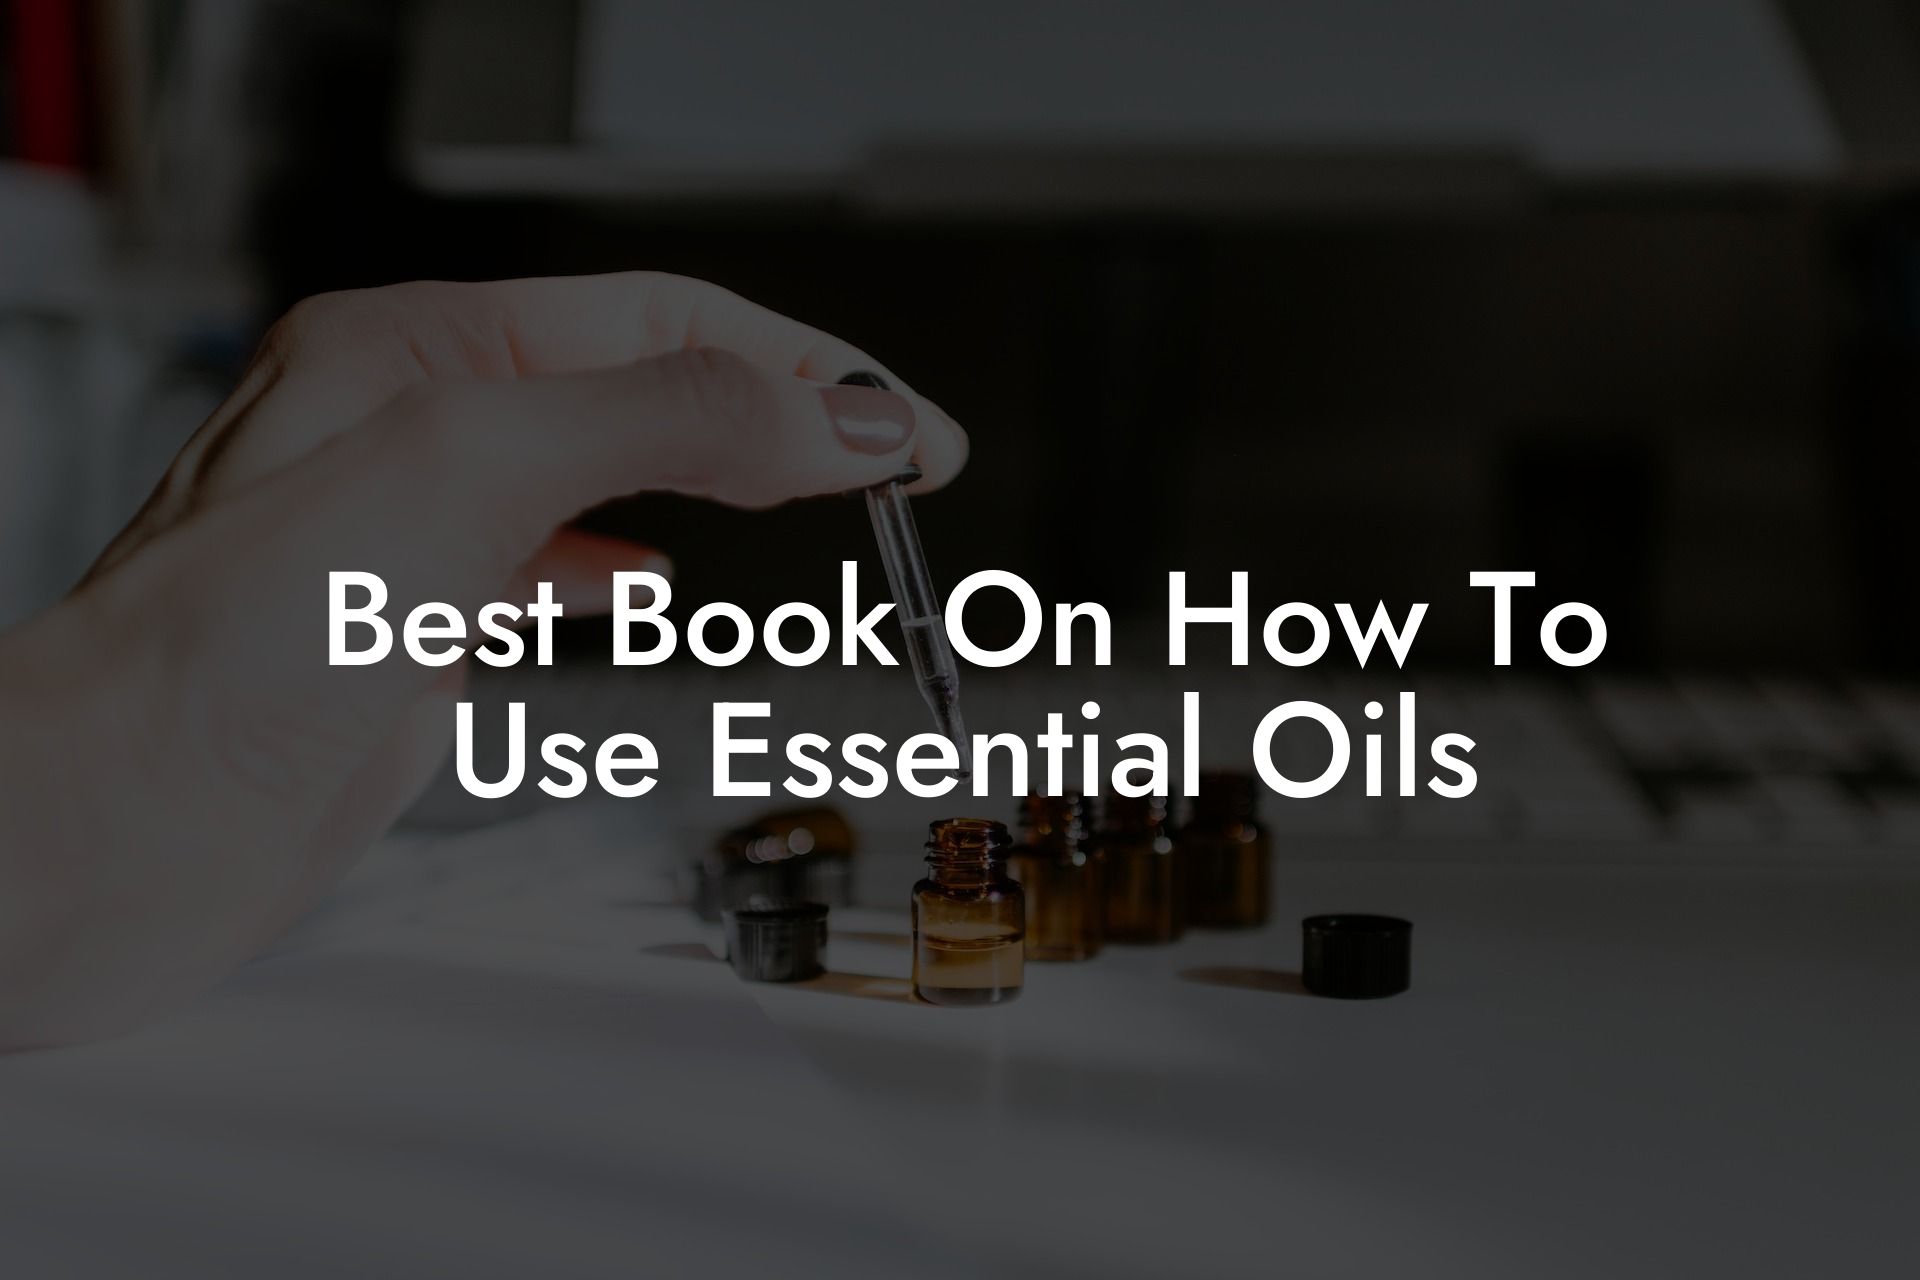 Best Book On How To Use Essential Oils